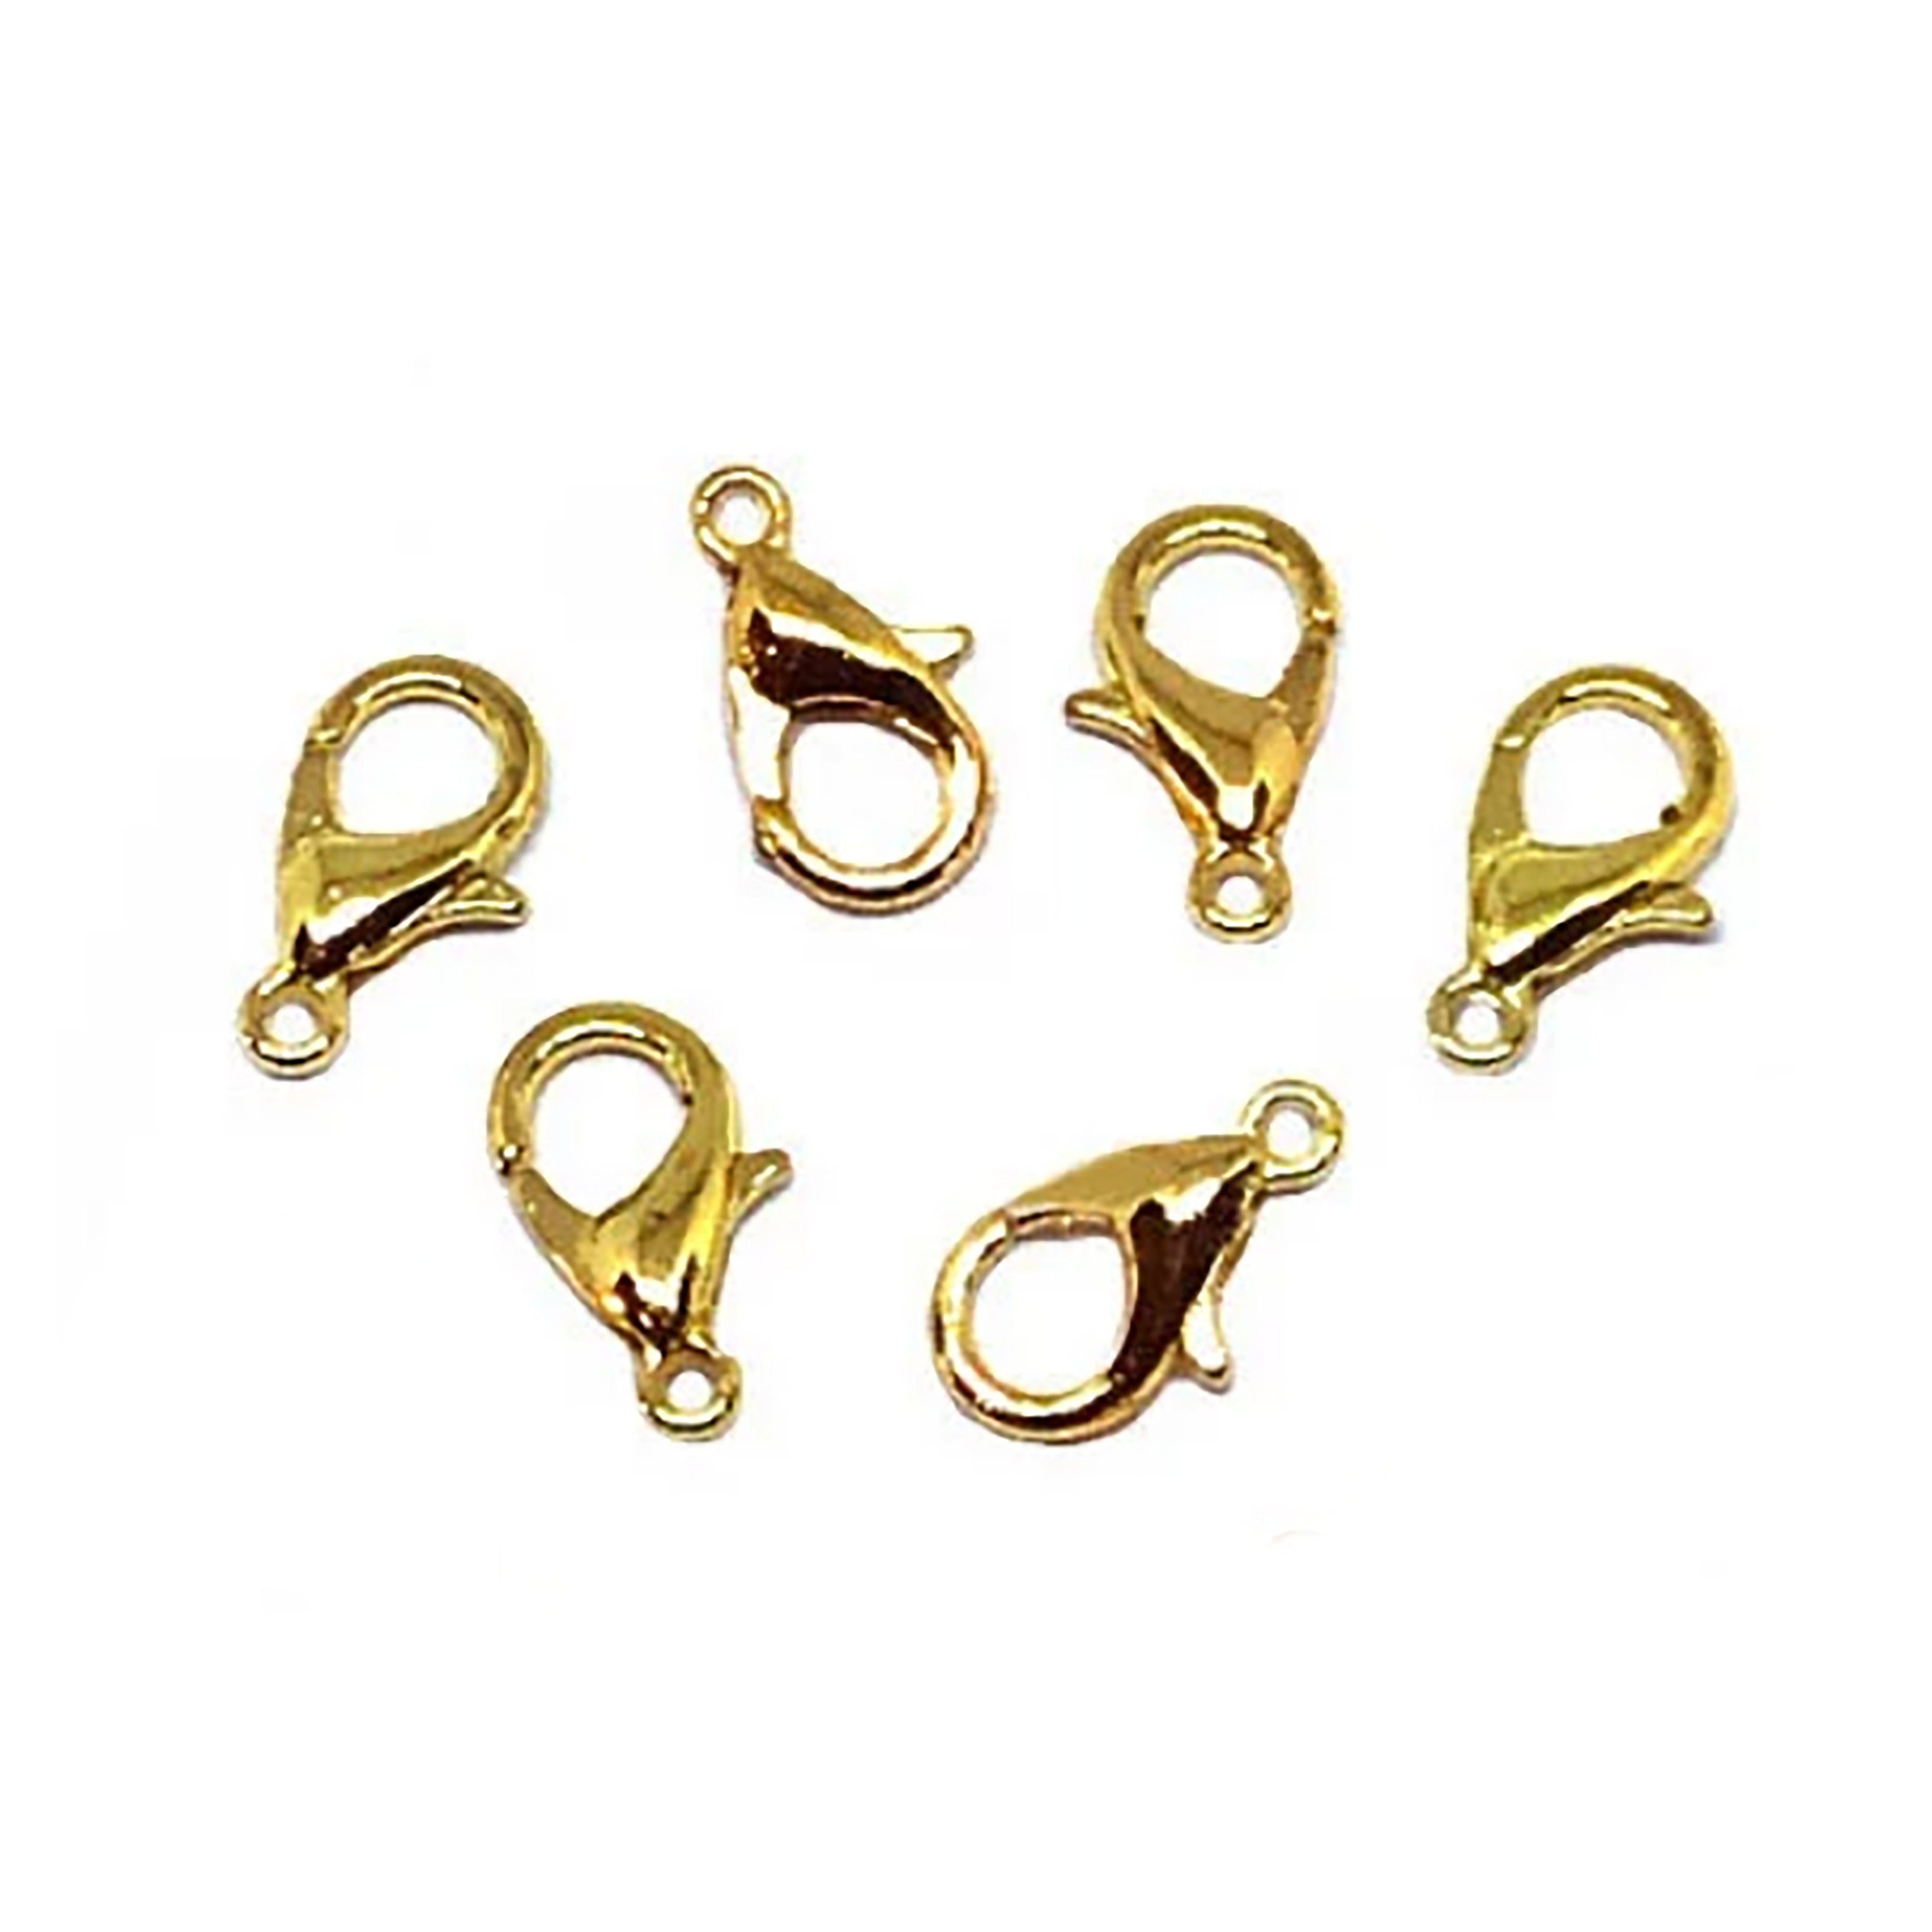 Large Lobster claw clasp, goldtone, 01204, jewelry making supplies